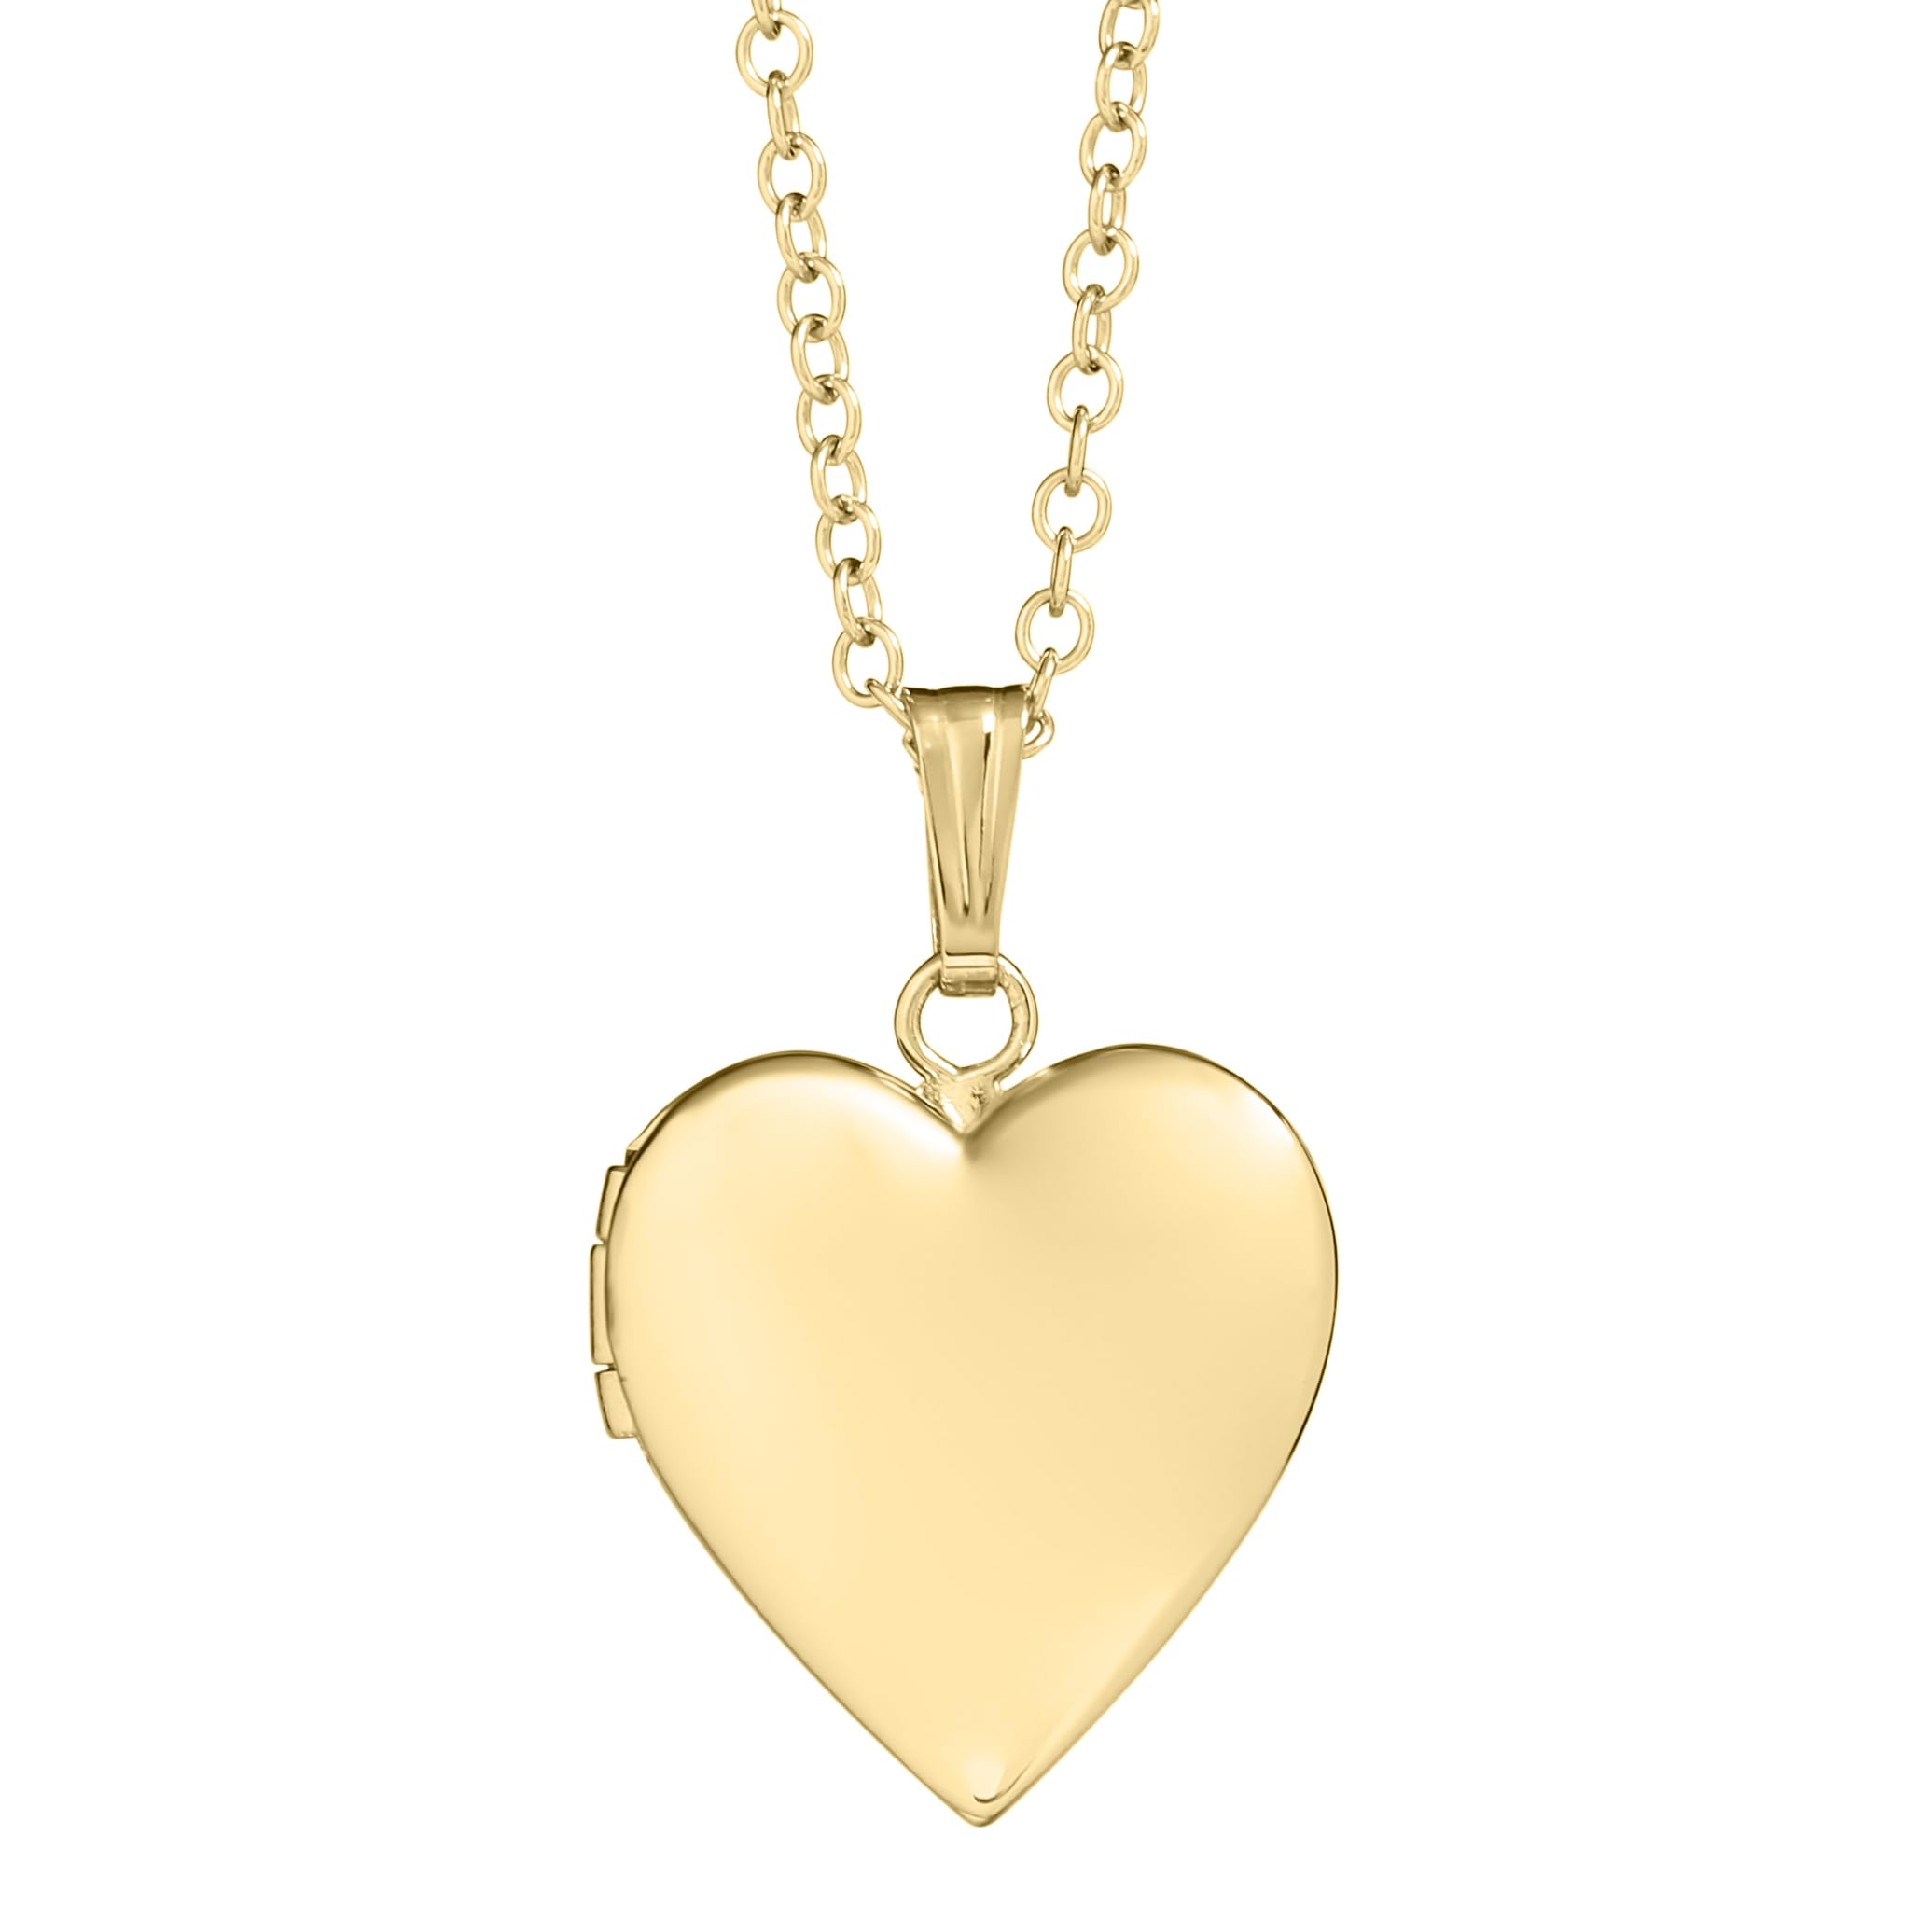 Amazon Essentials Girls Polished Heart Locket (previously Amazon Collection)